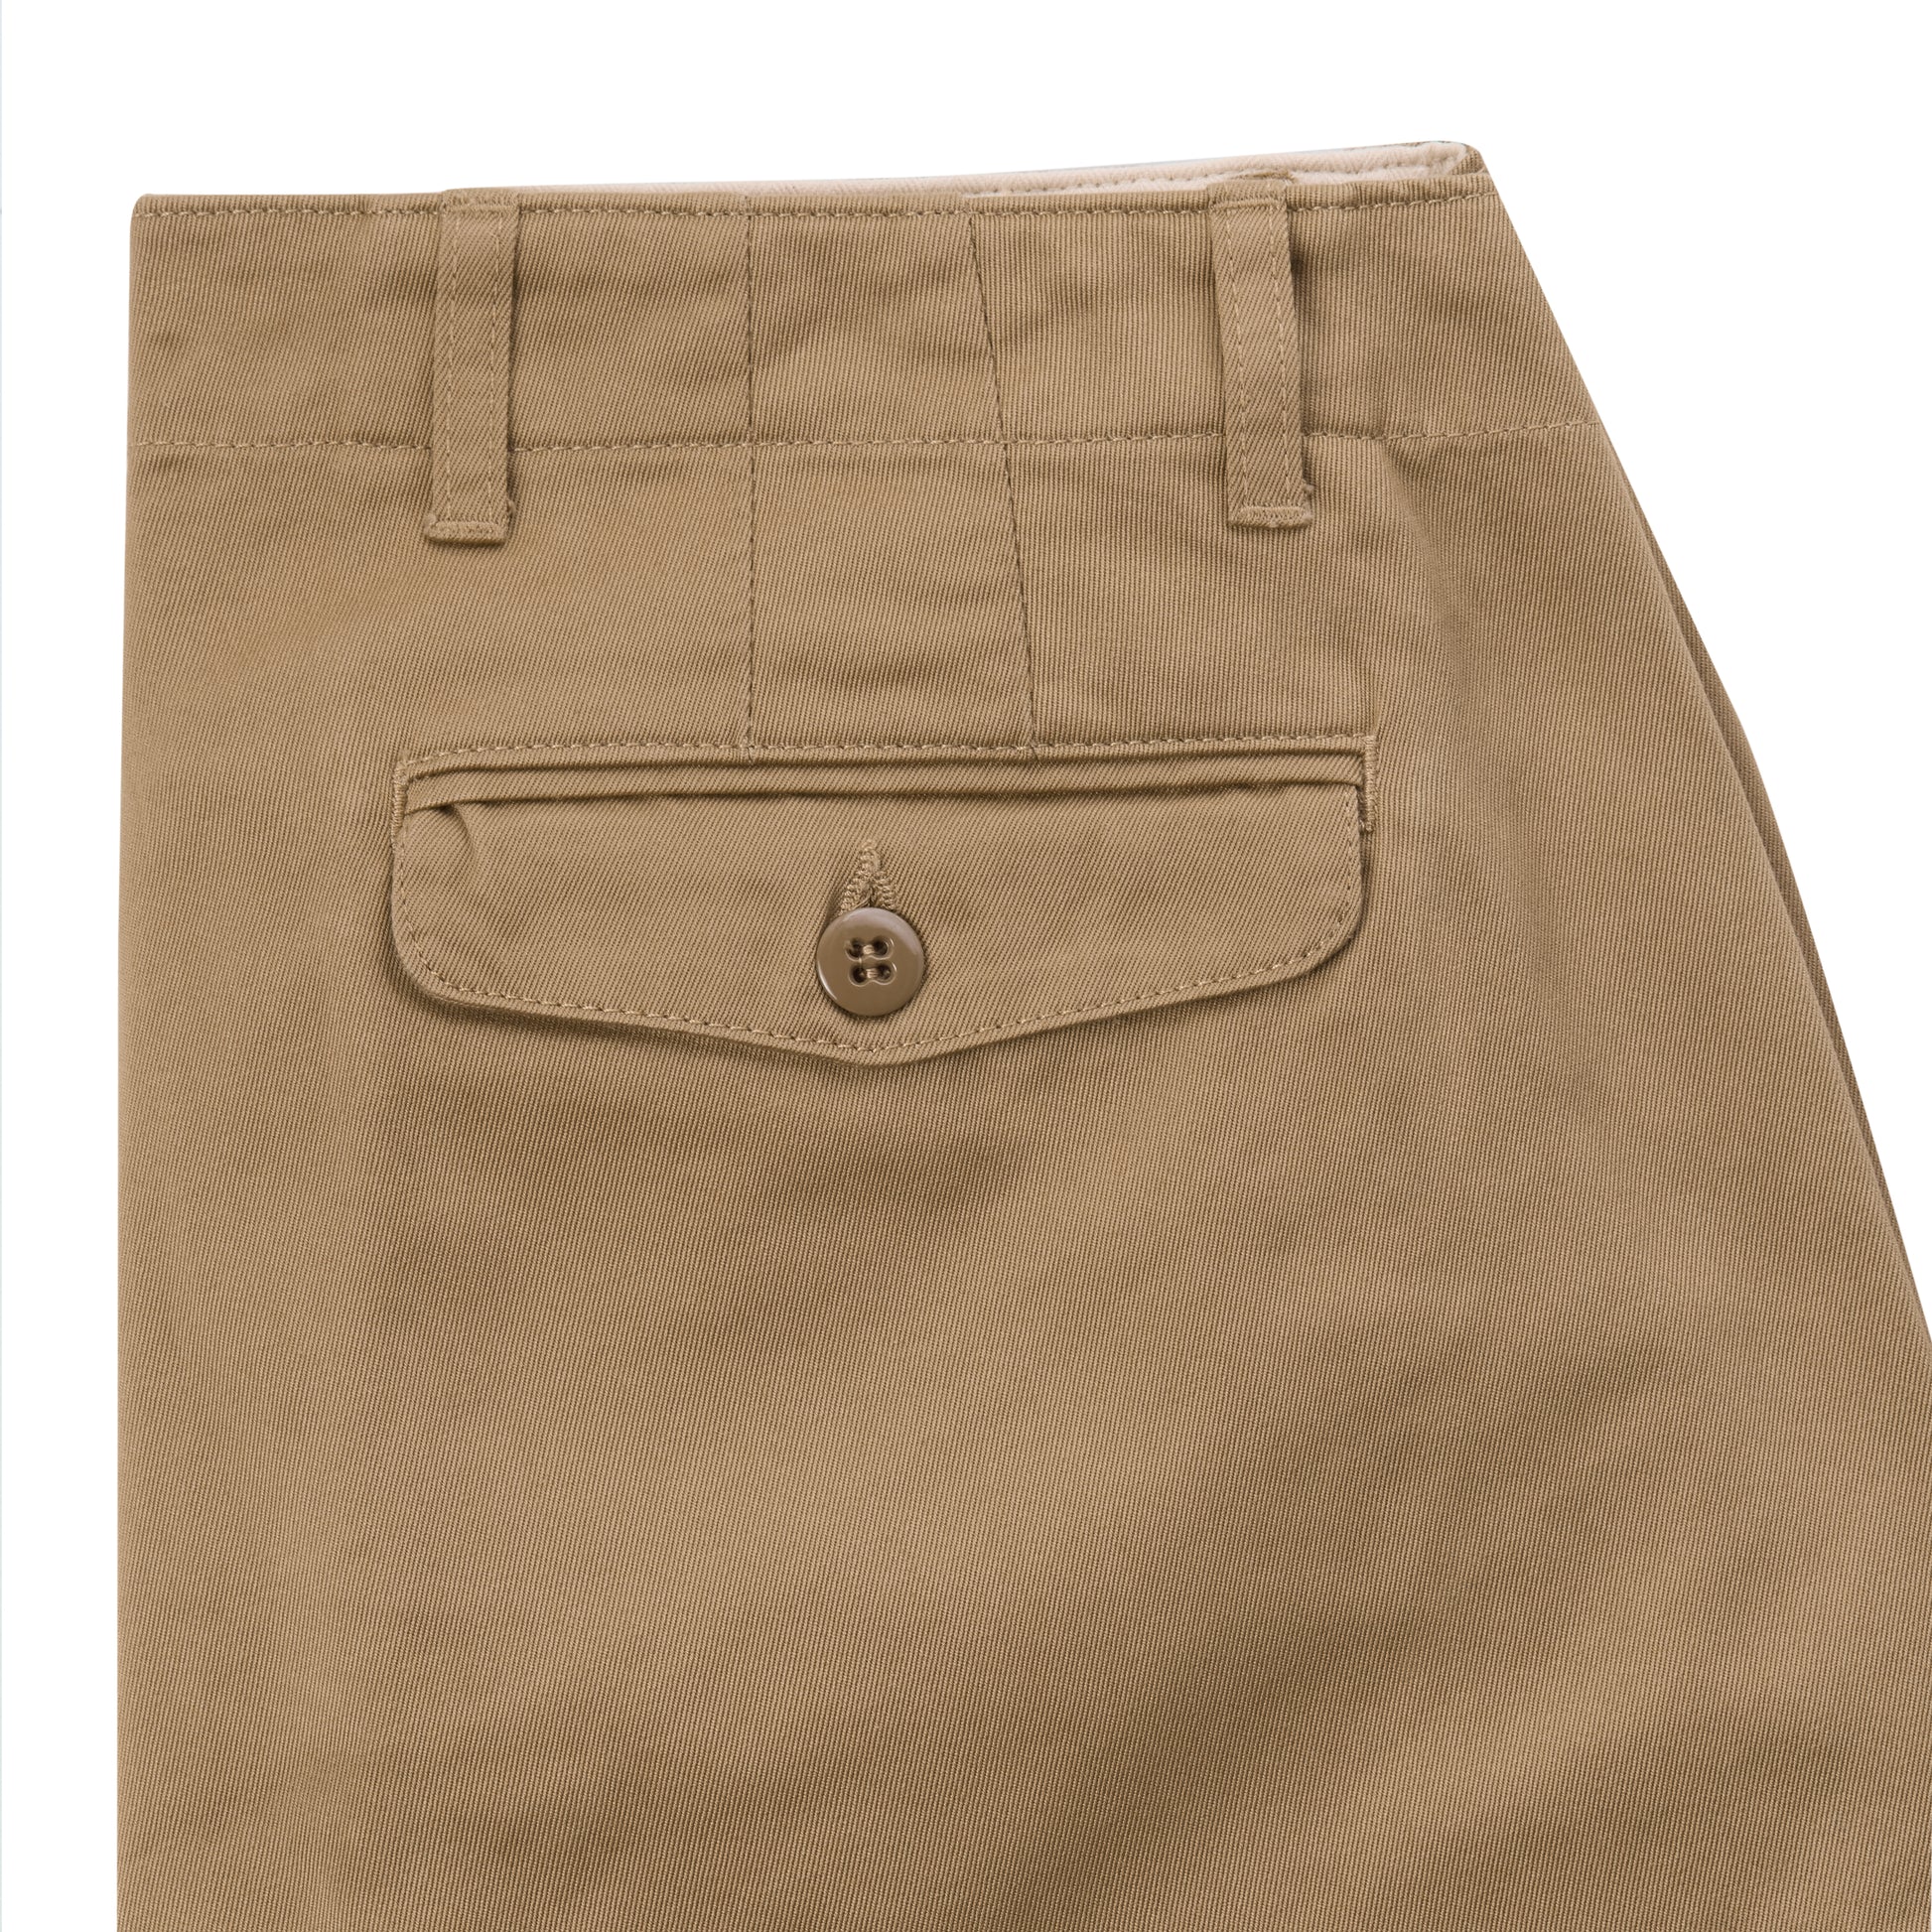 chino homme officier sable us trouser detail poches dos avec boutons